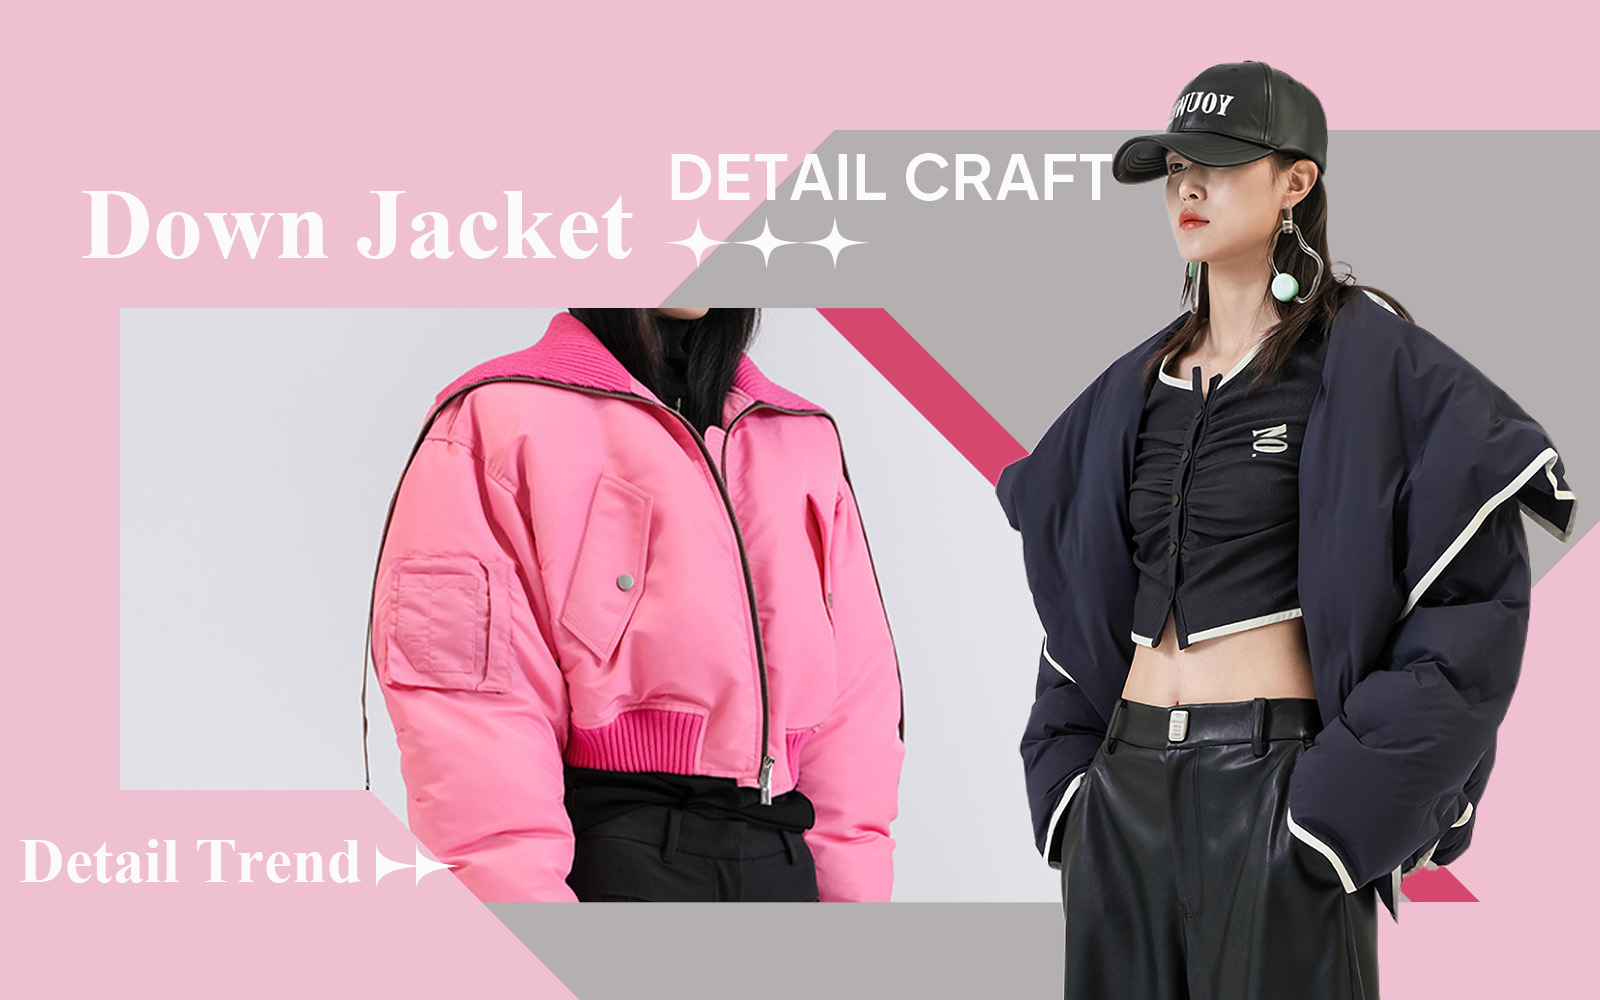 The Detail & Craft Trend for Women's Down Jacket